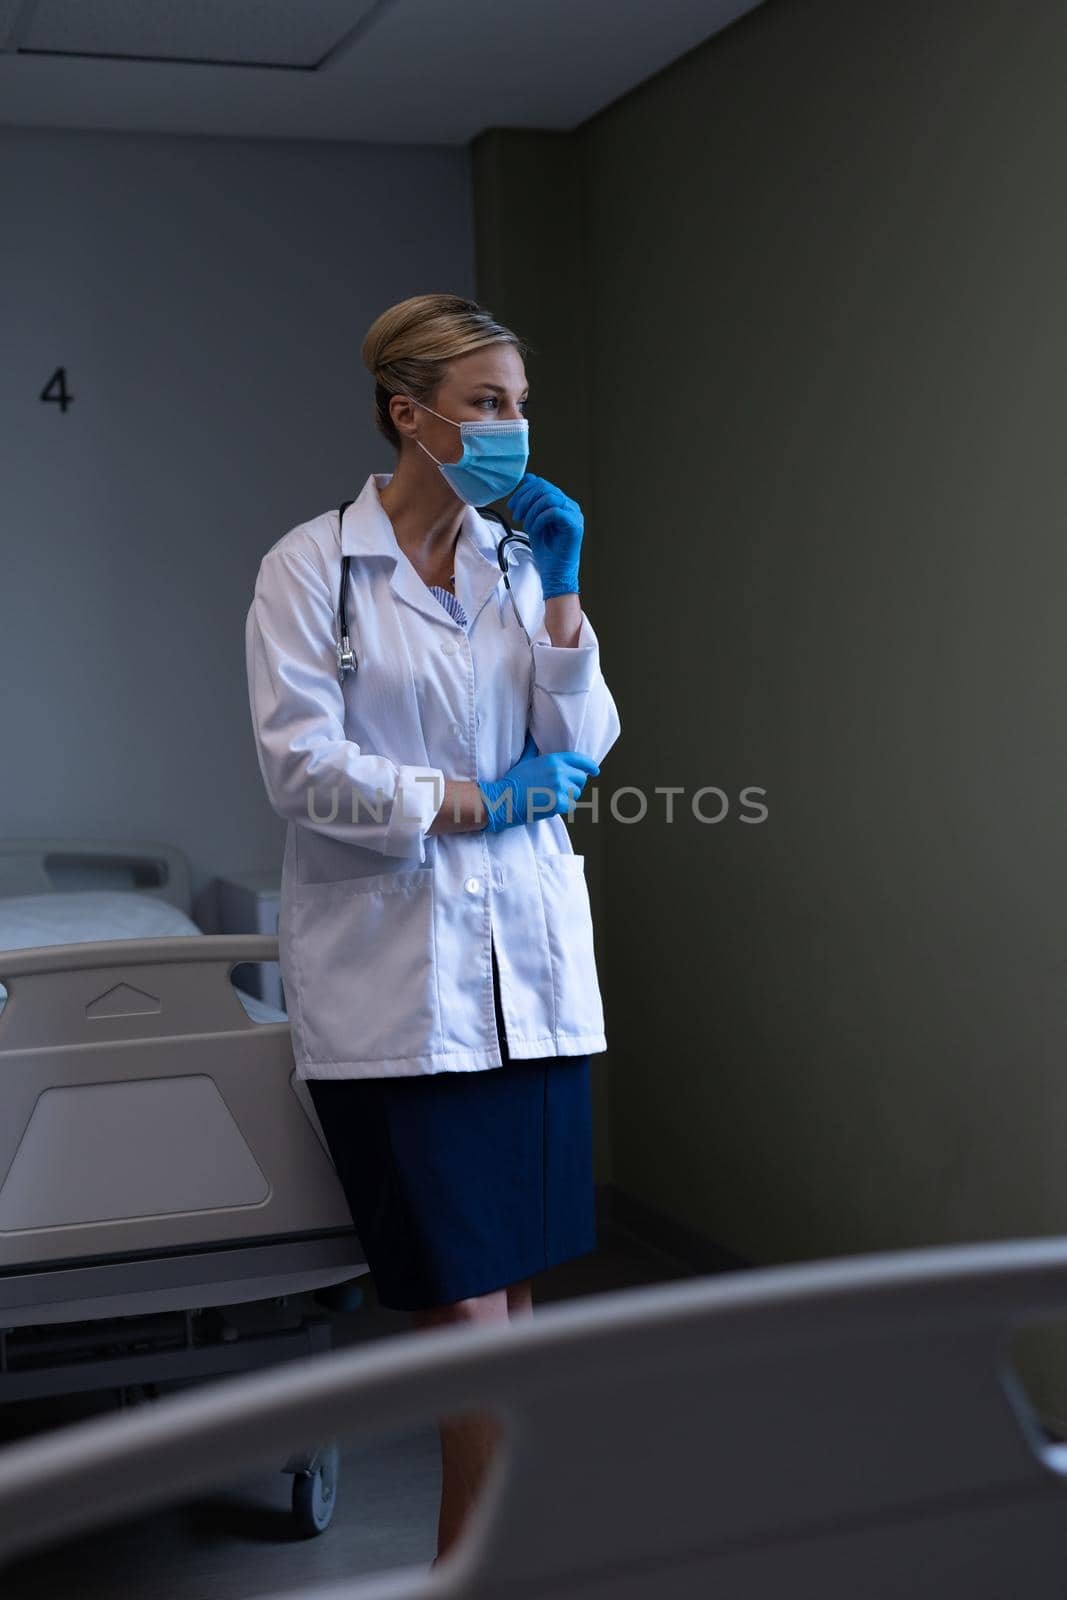 Portrait of caucasian female doctor wearing mask and latex gloves looking ahead. medicine, health and healthcare services during coronavirus covid 19 pandemic.